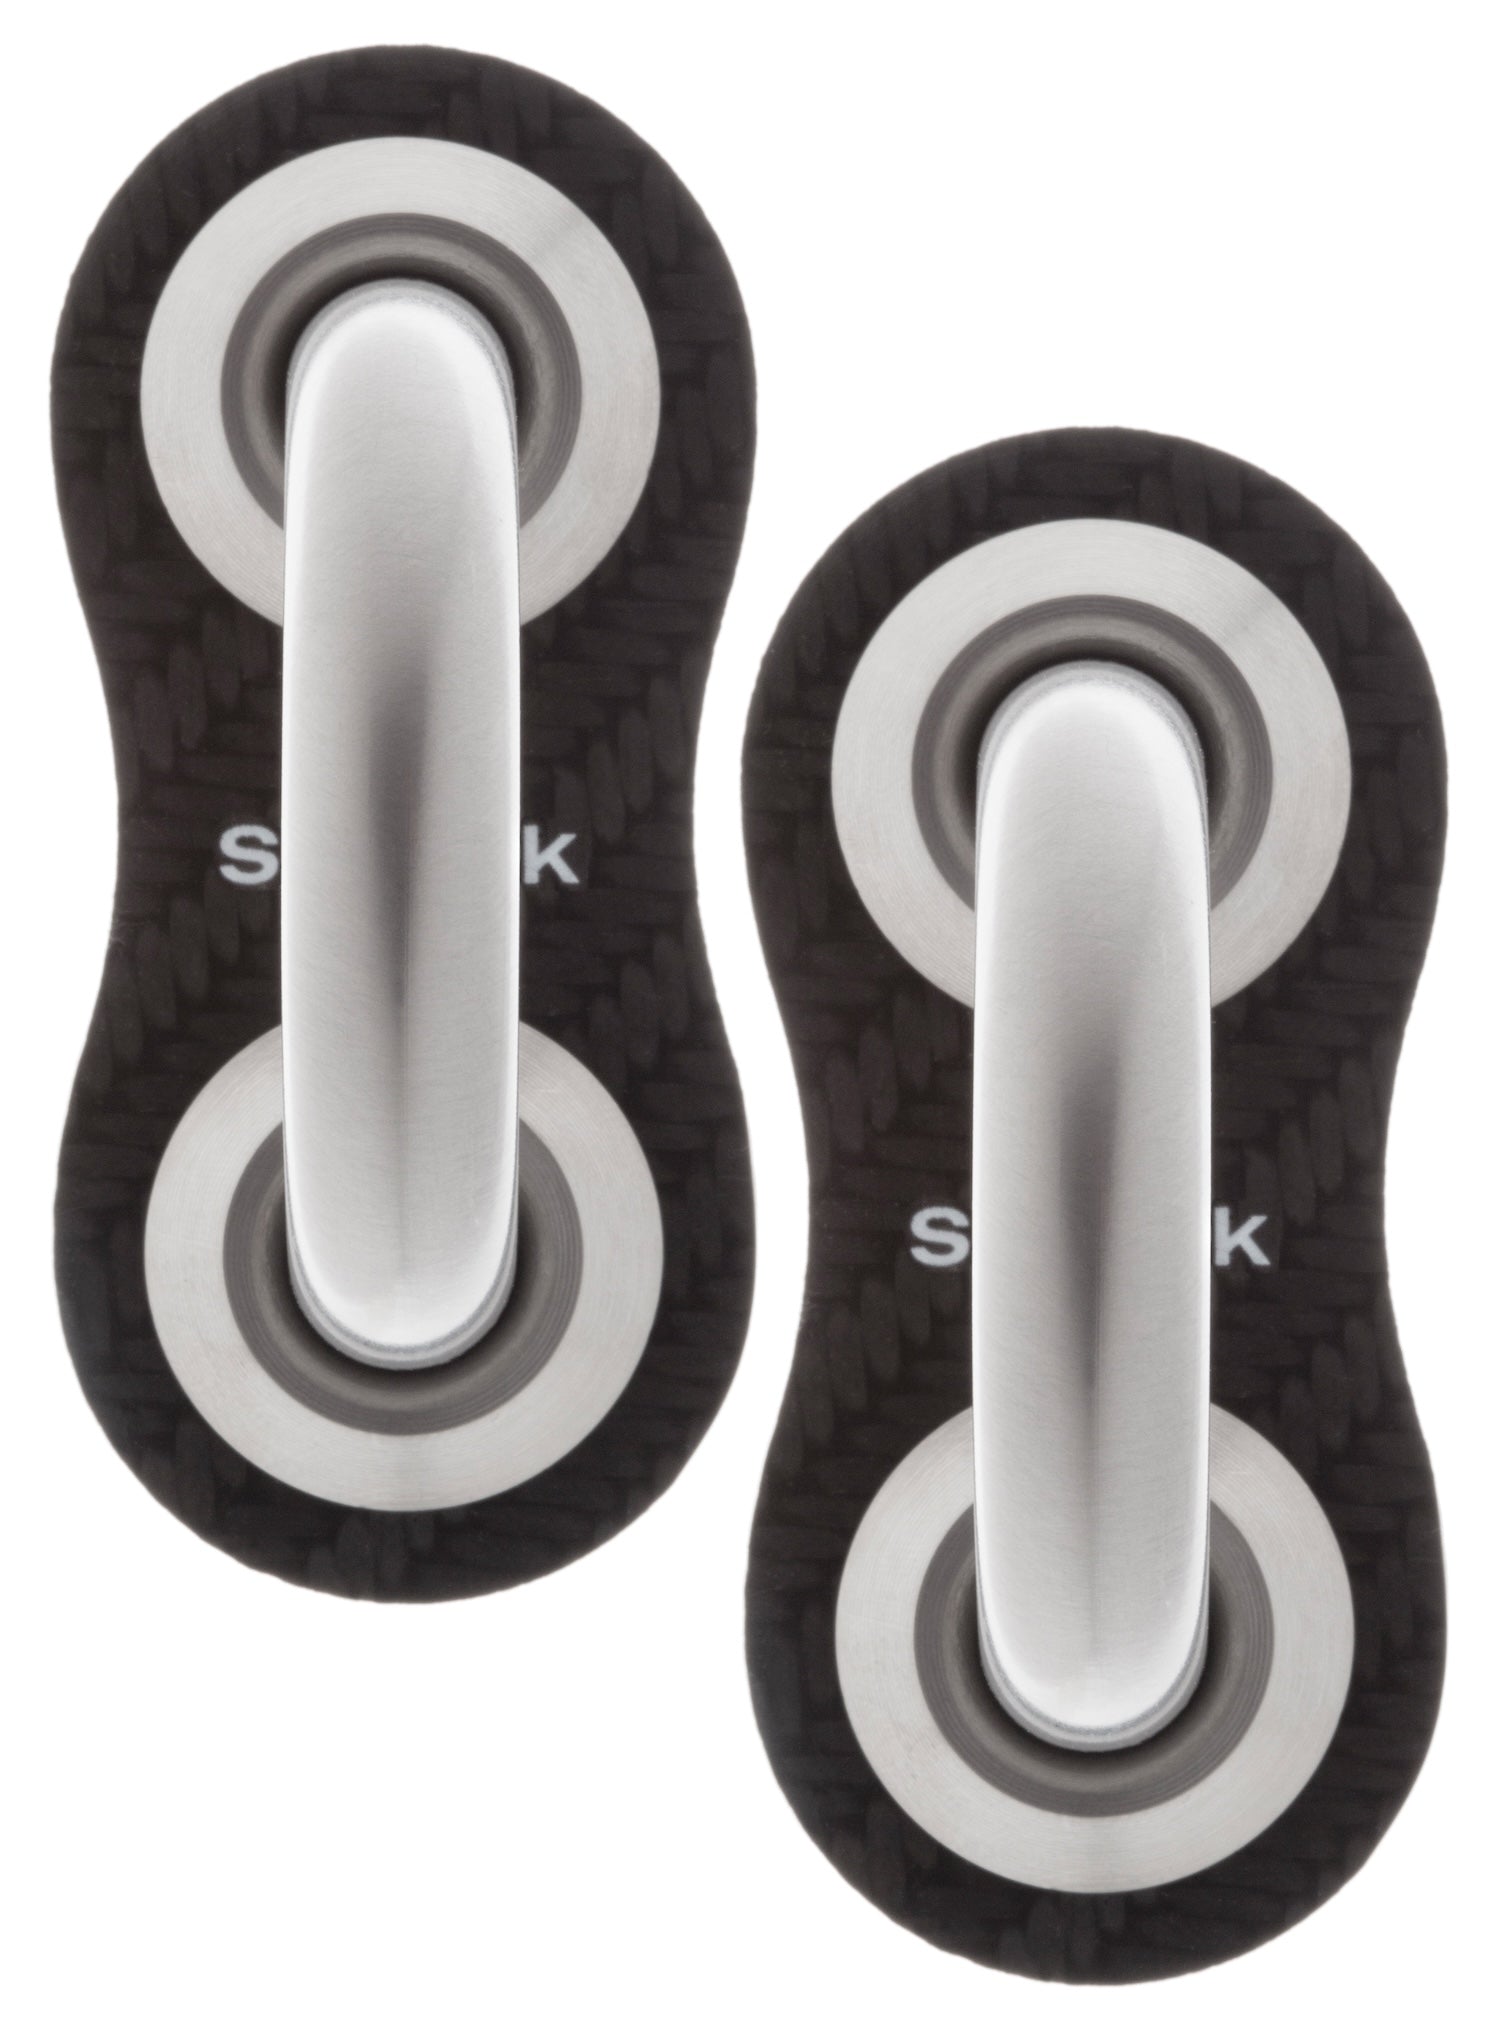 Spinlock High-Strength Padeye 12mm In 17-4PH with Carbon Plates | SendIt Sailing